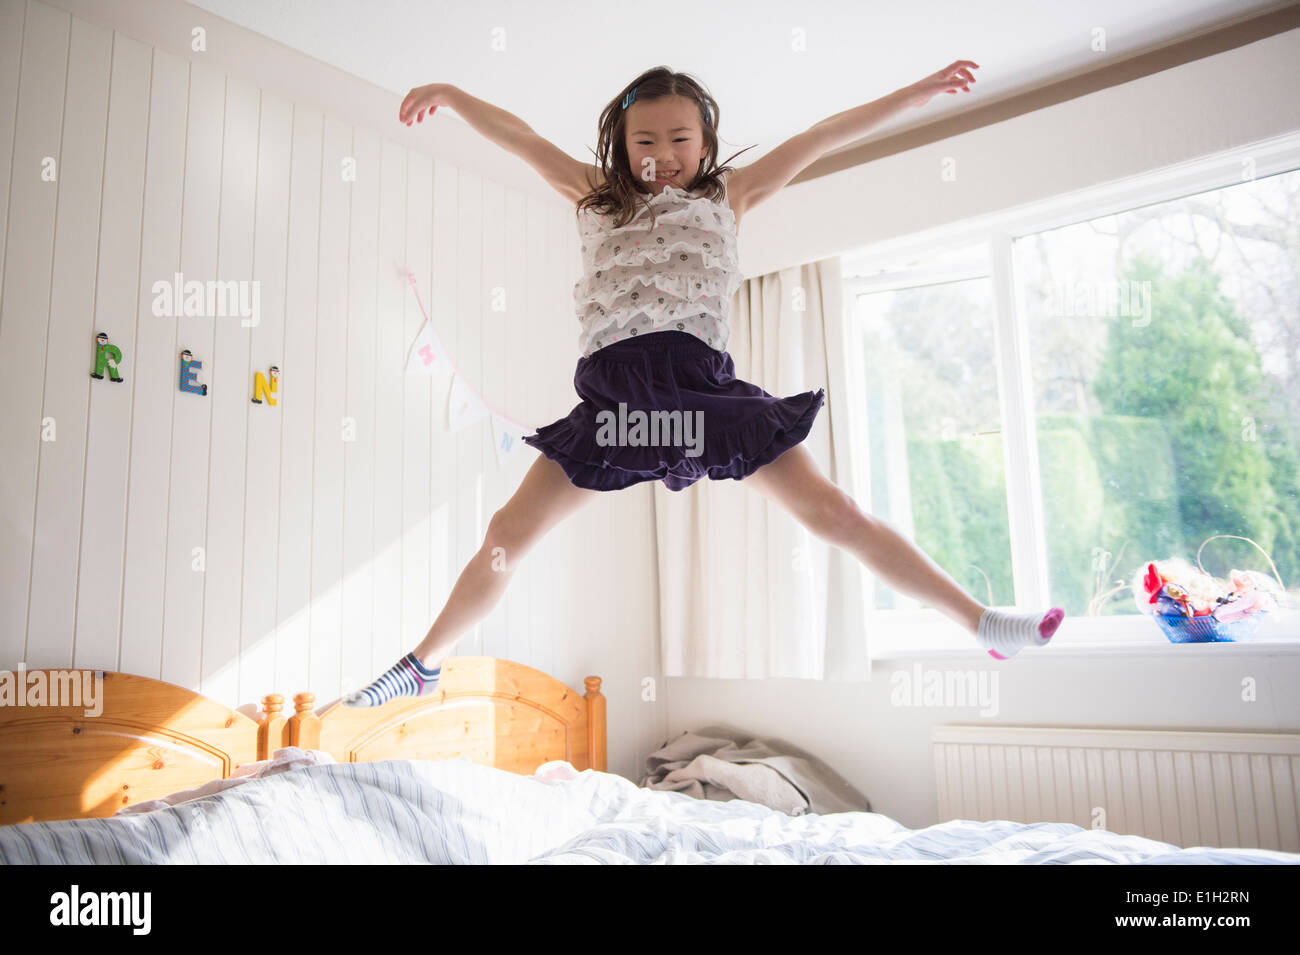 Young Girl jumping mid air on bed Banque D'Images